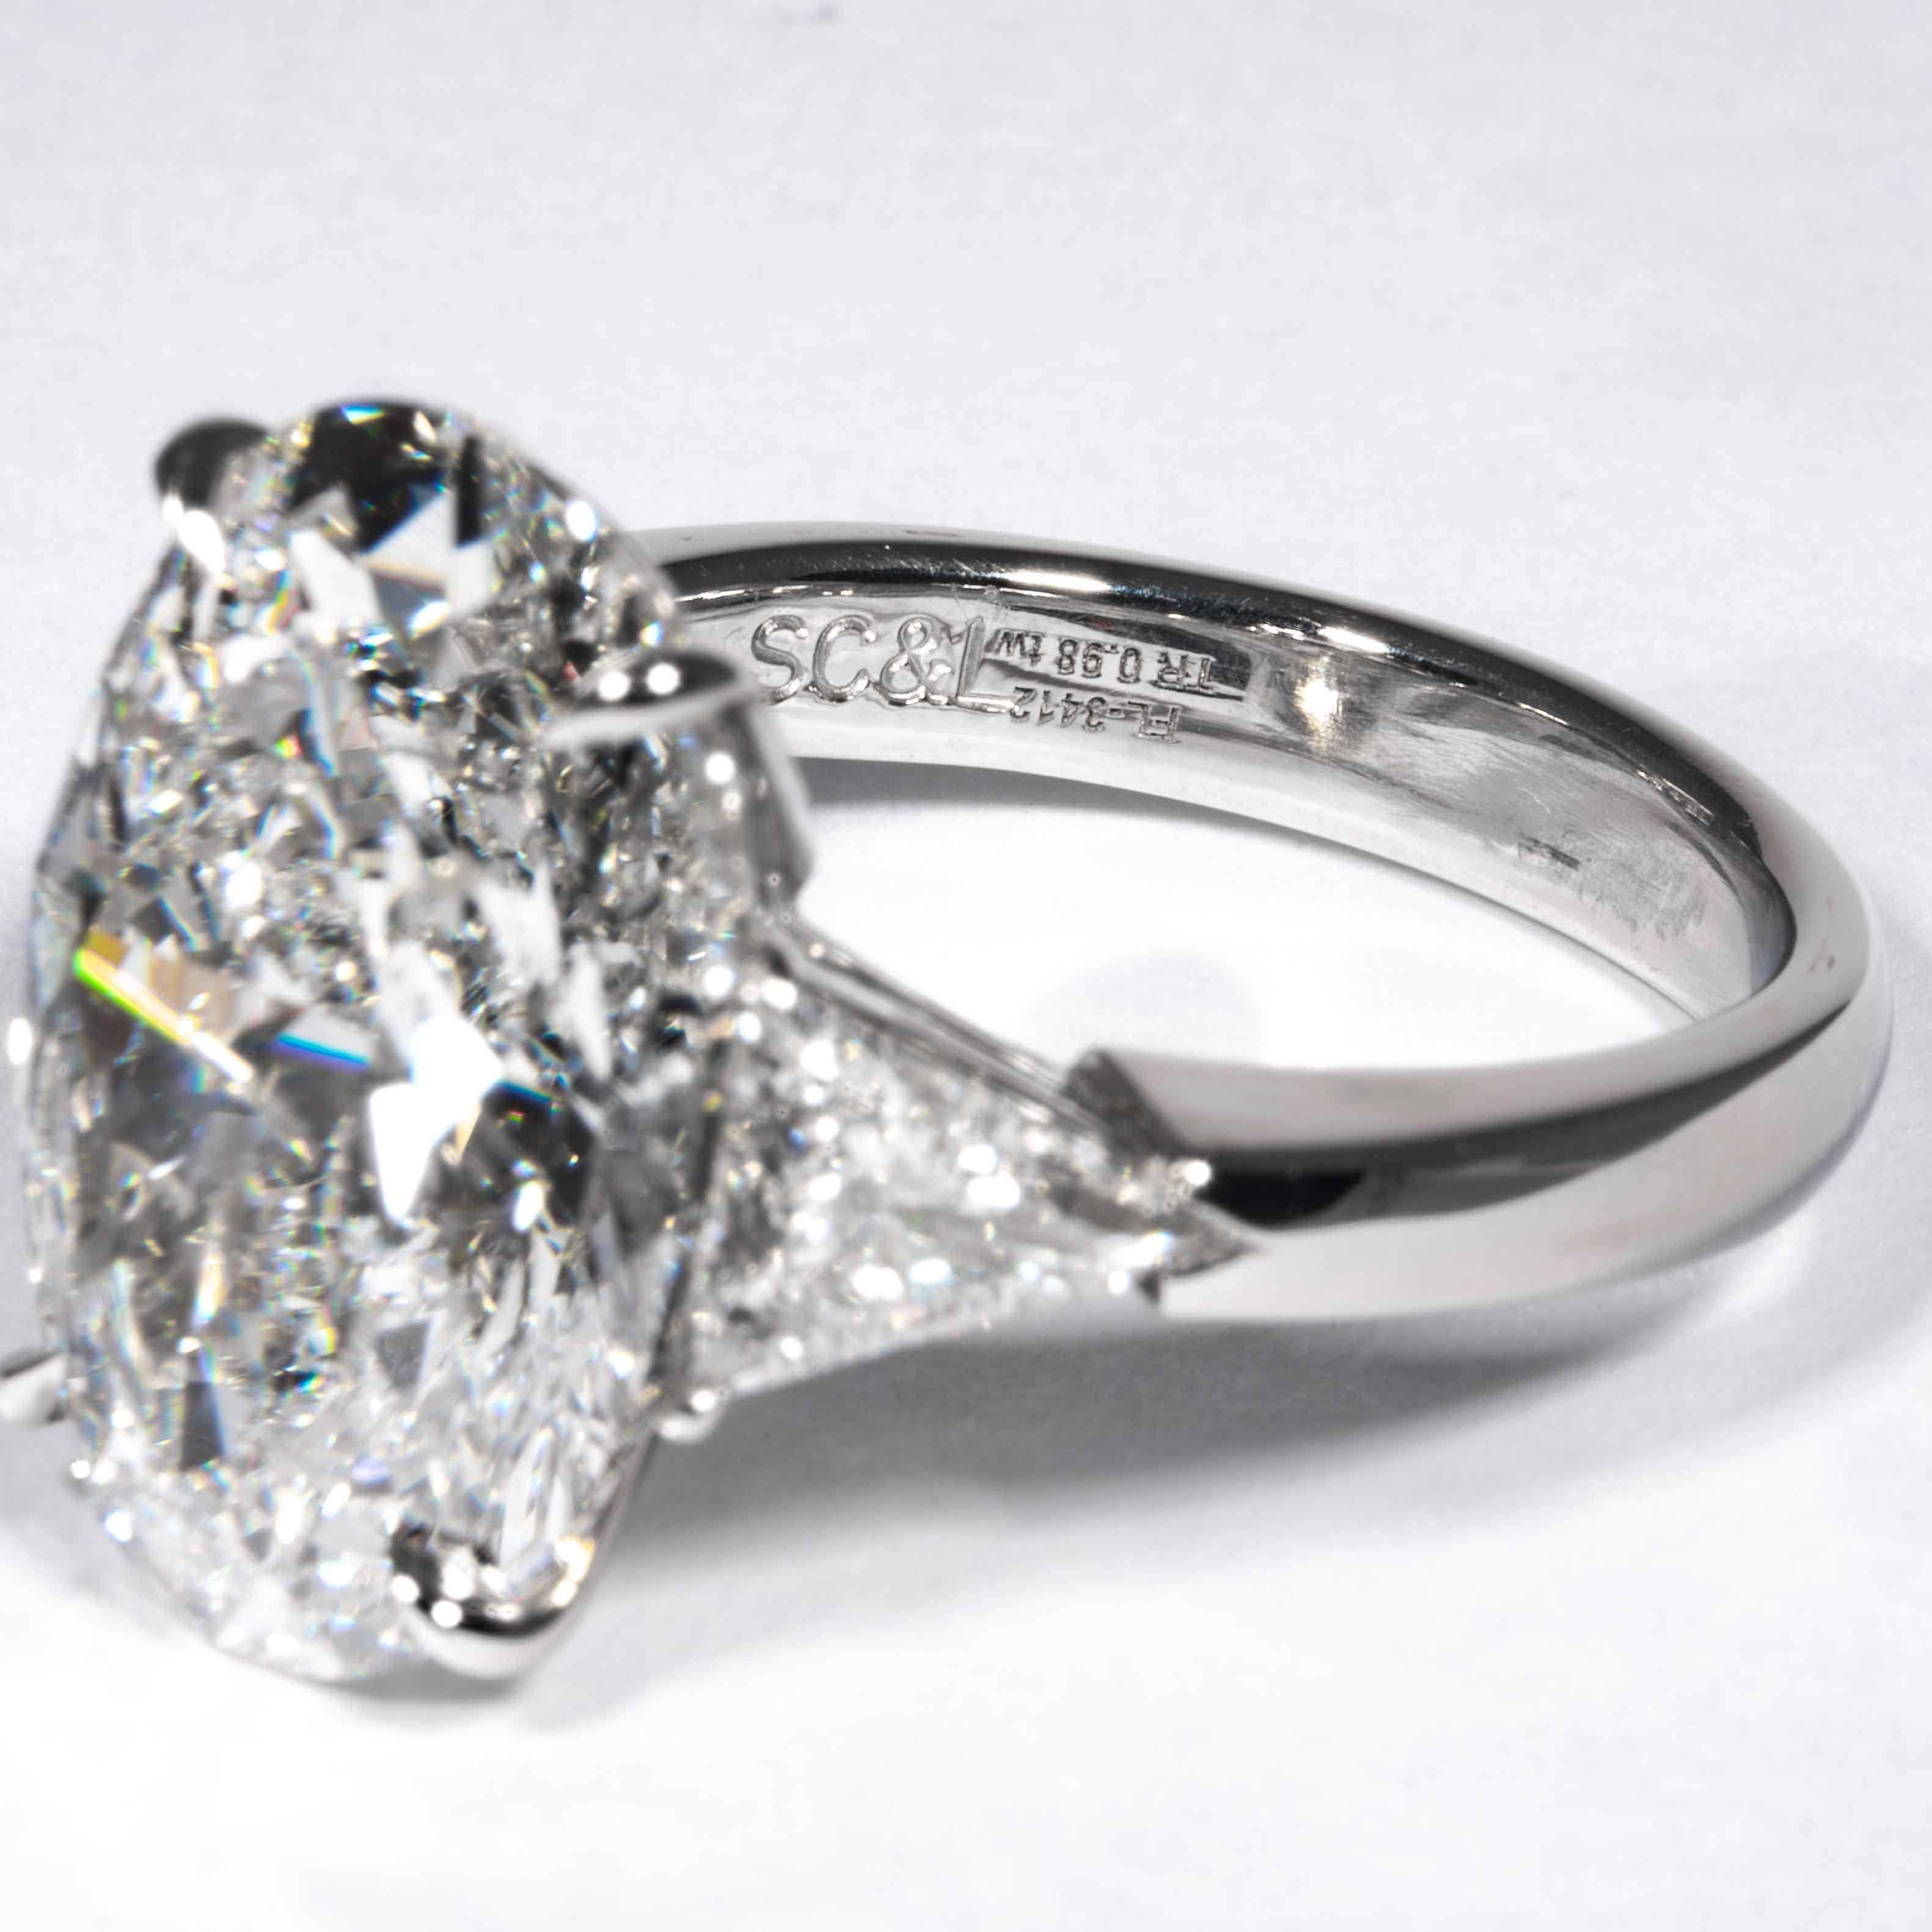 Shreve, Crump & Low GIA Certified 9.08 Carat F SI2 Oval Cut Diamond 3-Stone Ring In New Condition For Sale In Boston, MA